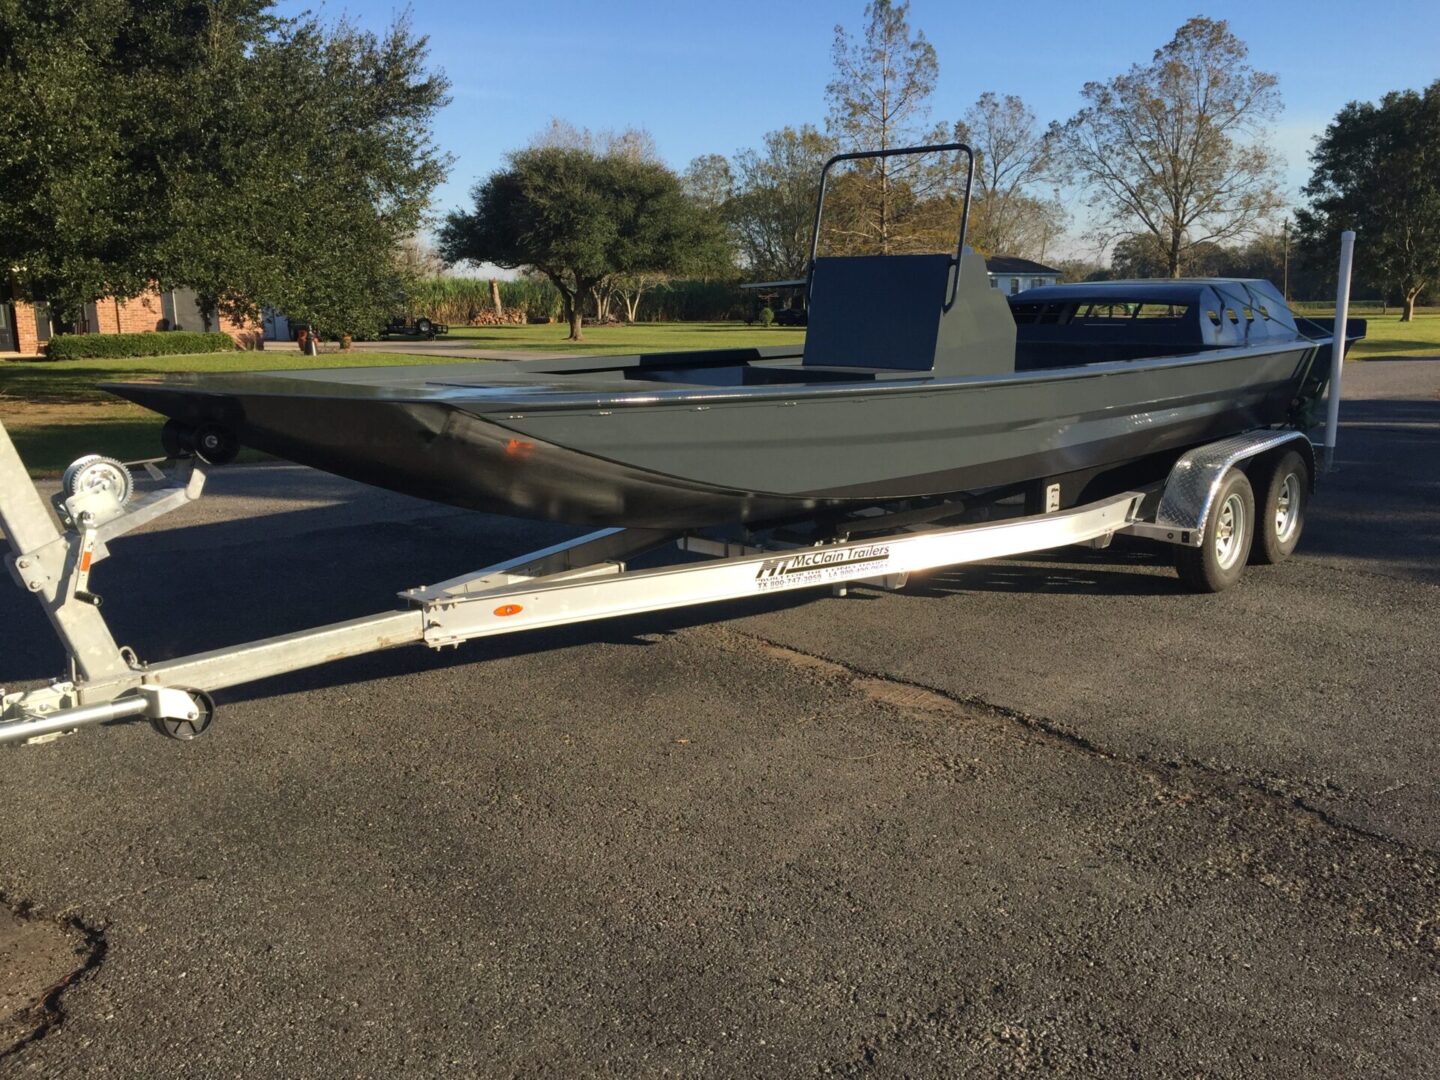 A black speed boat loaded onto a trailer and transpoted.